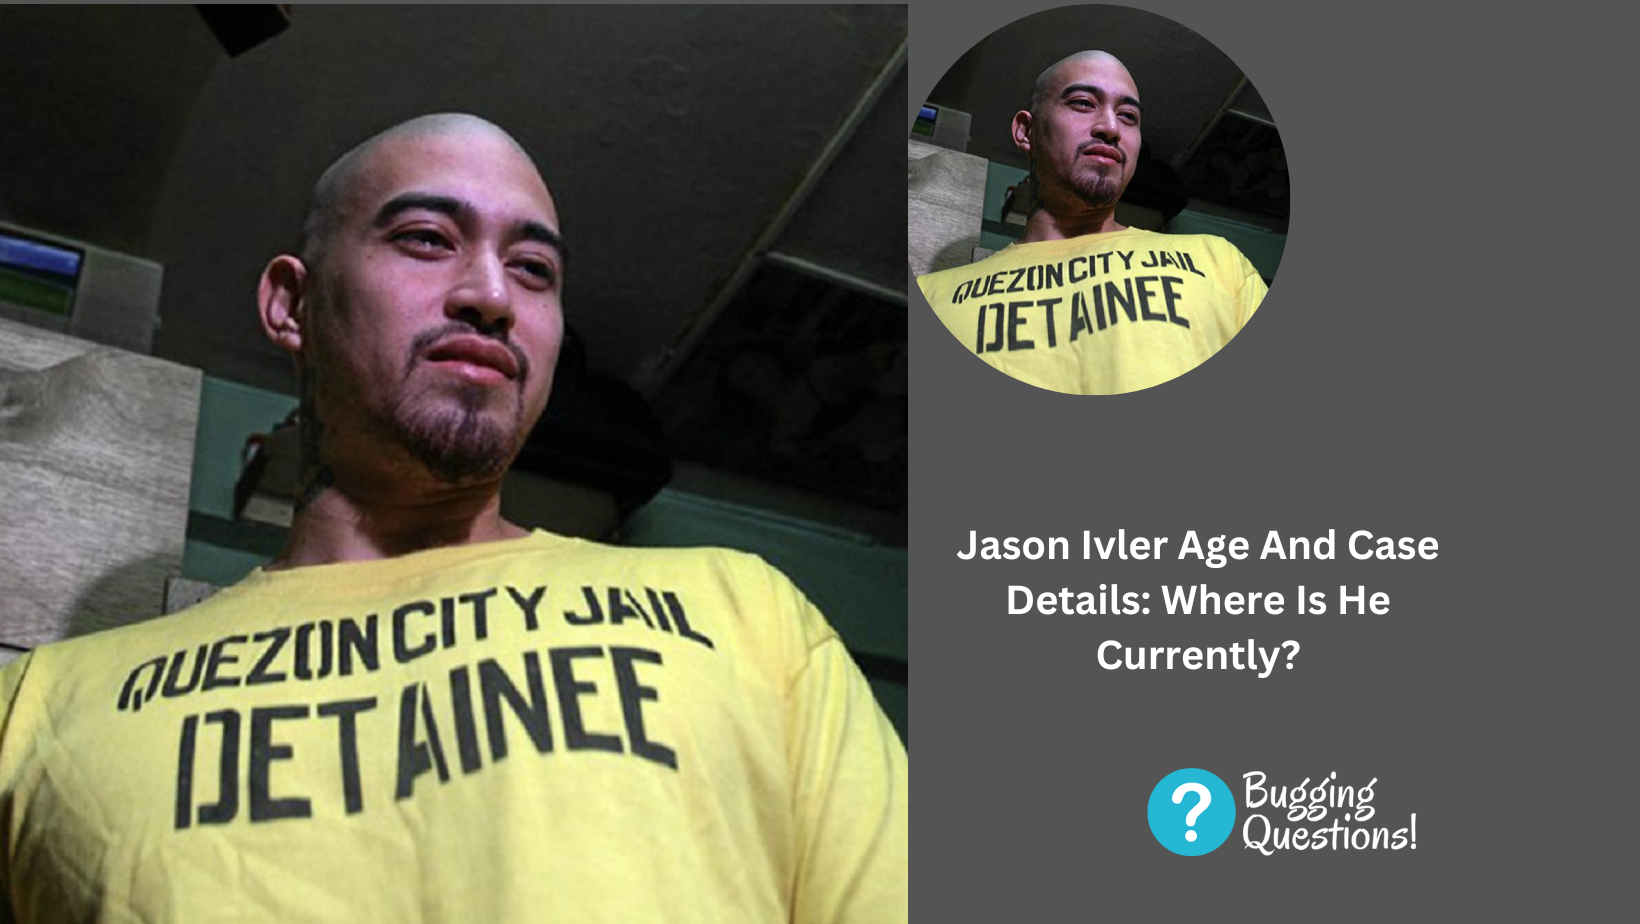 Jason Ivler Age And Case Details: Where Is He Currently?